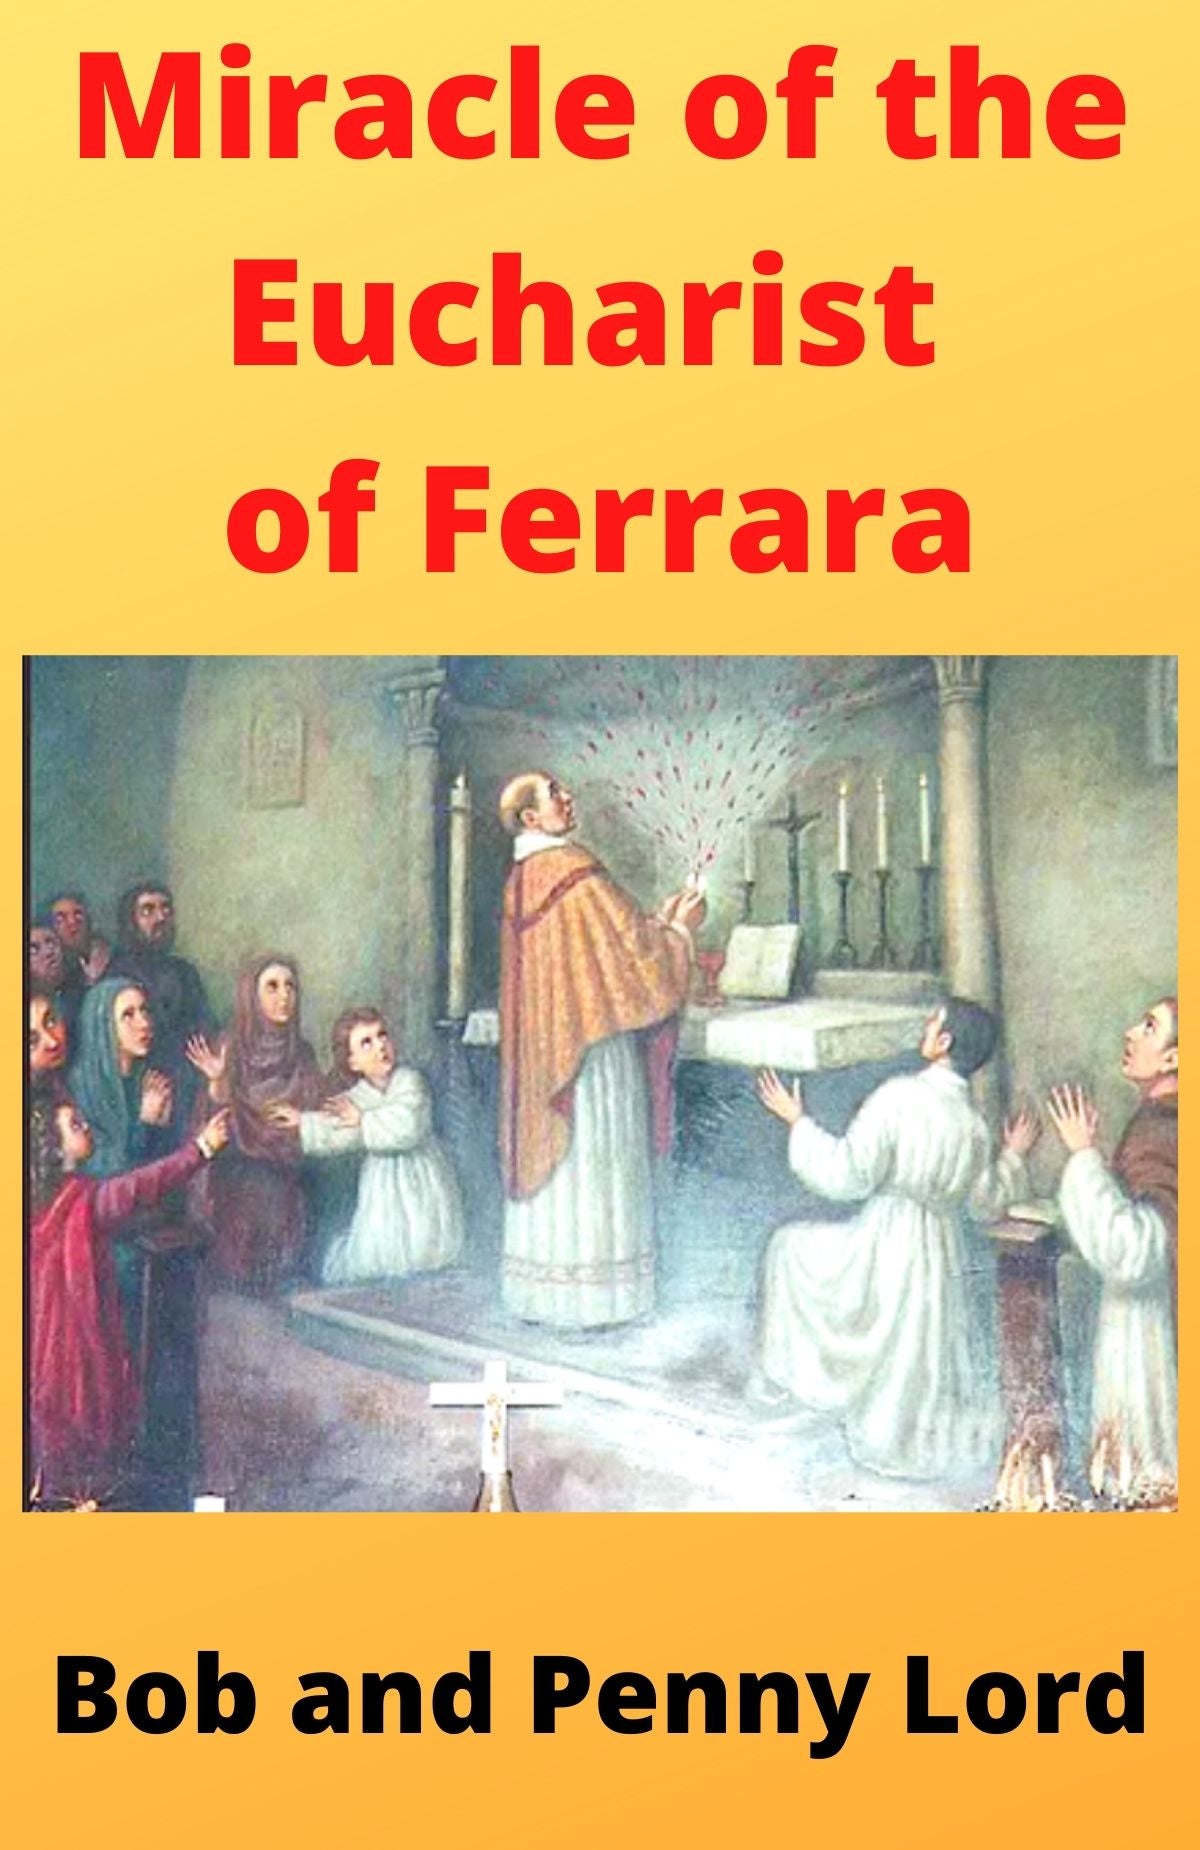 Miracles of the Eucharist Book I - Bob and Penny Lord